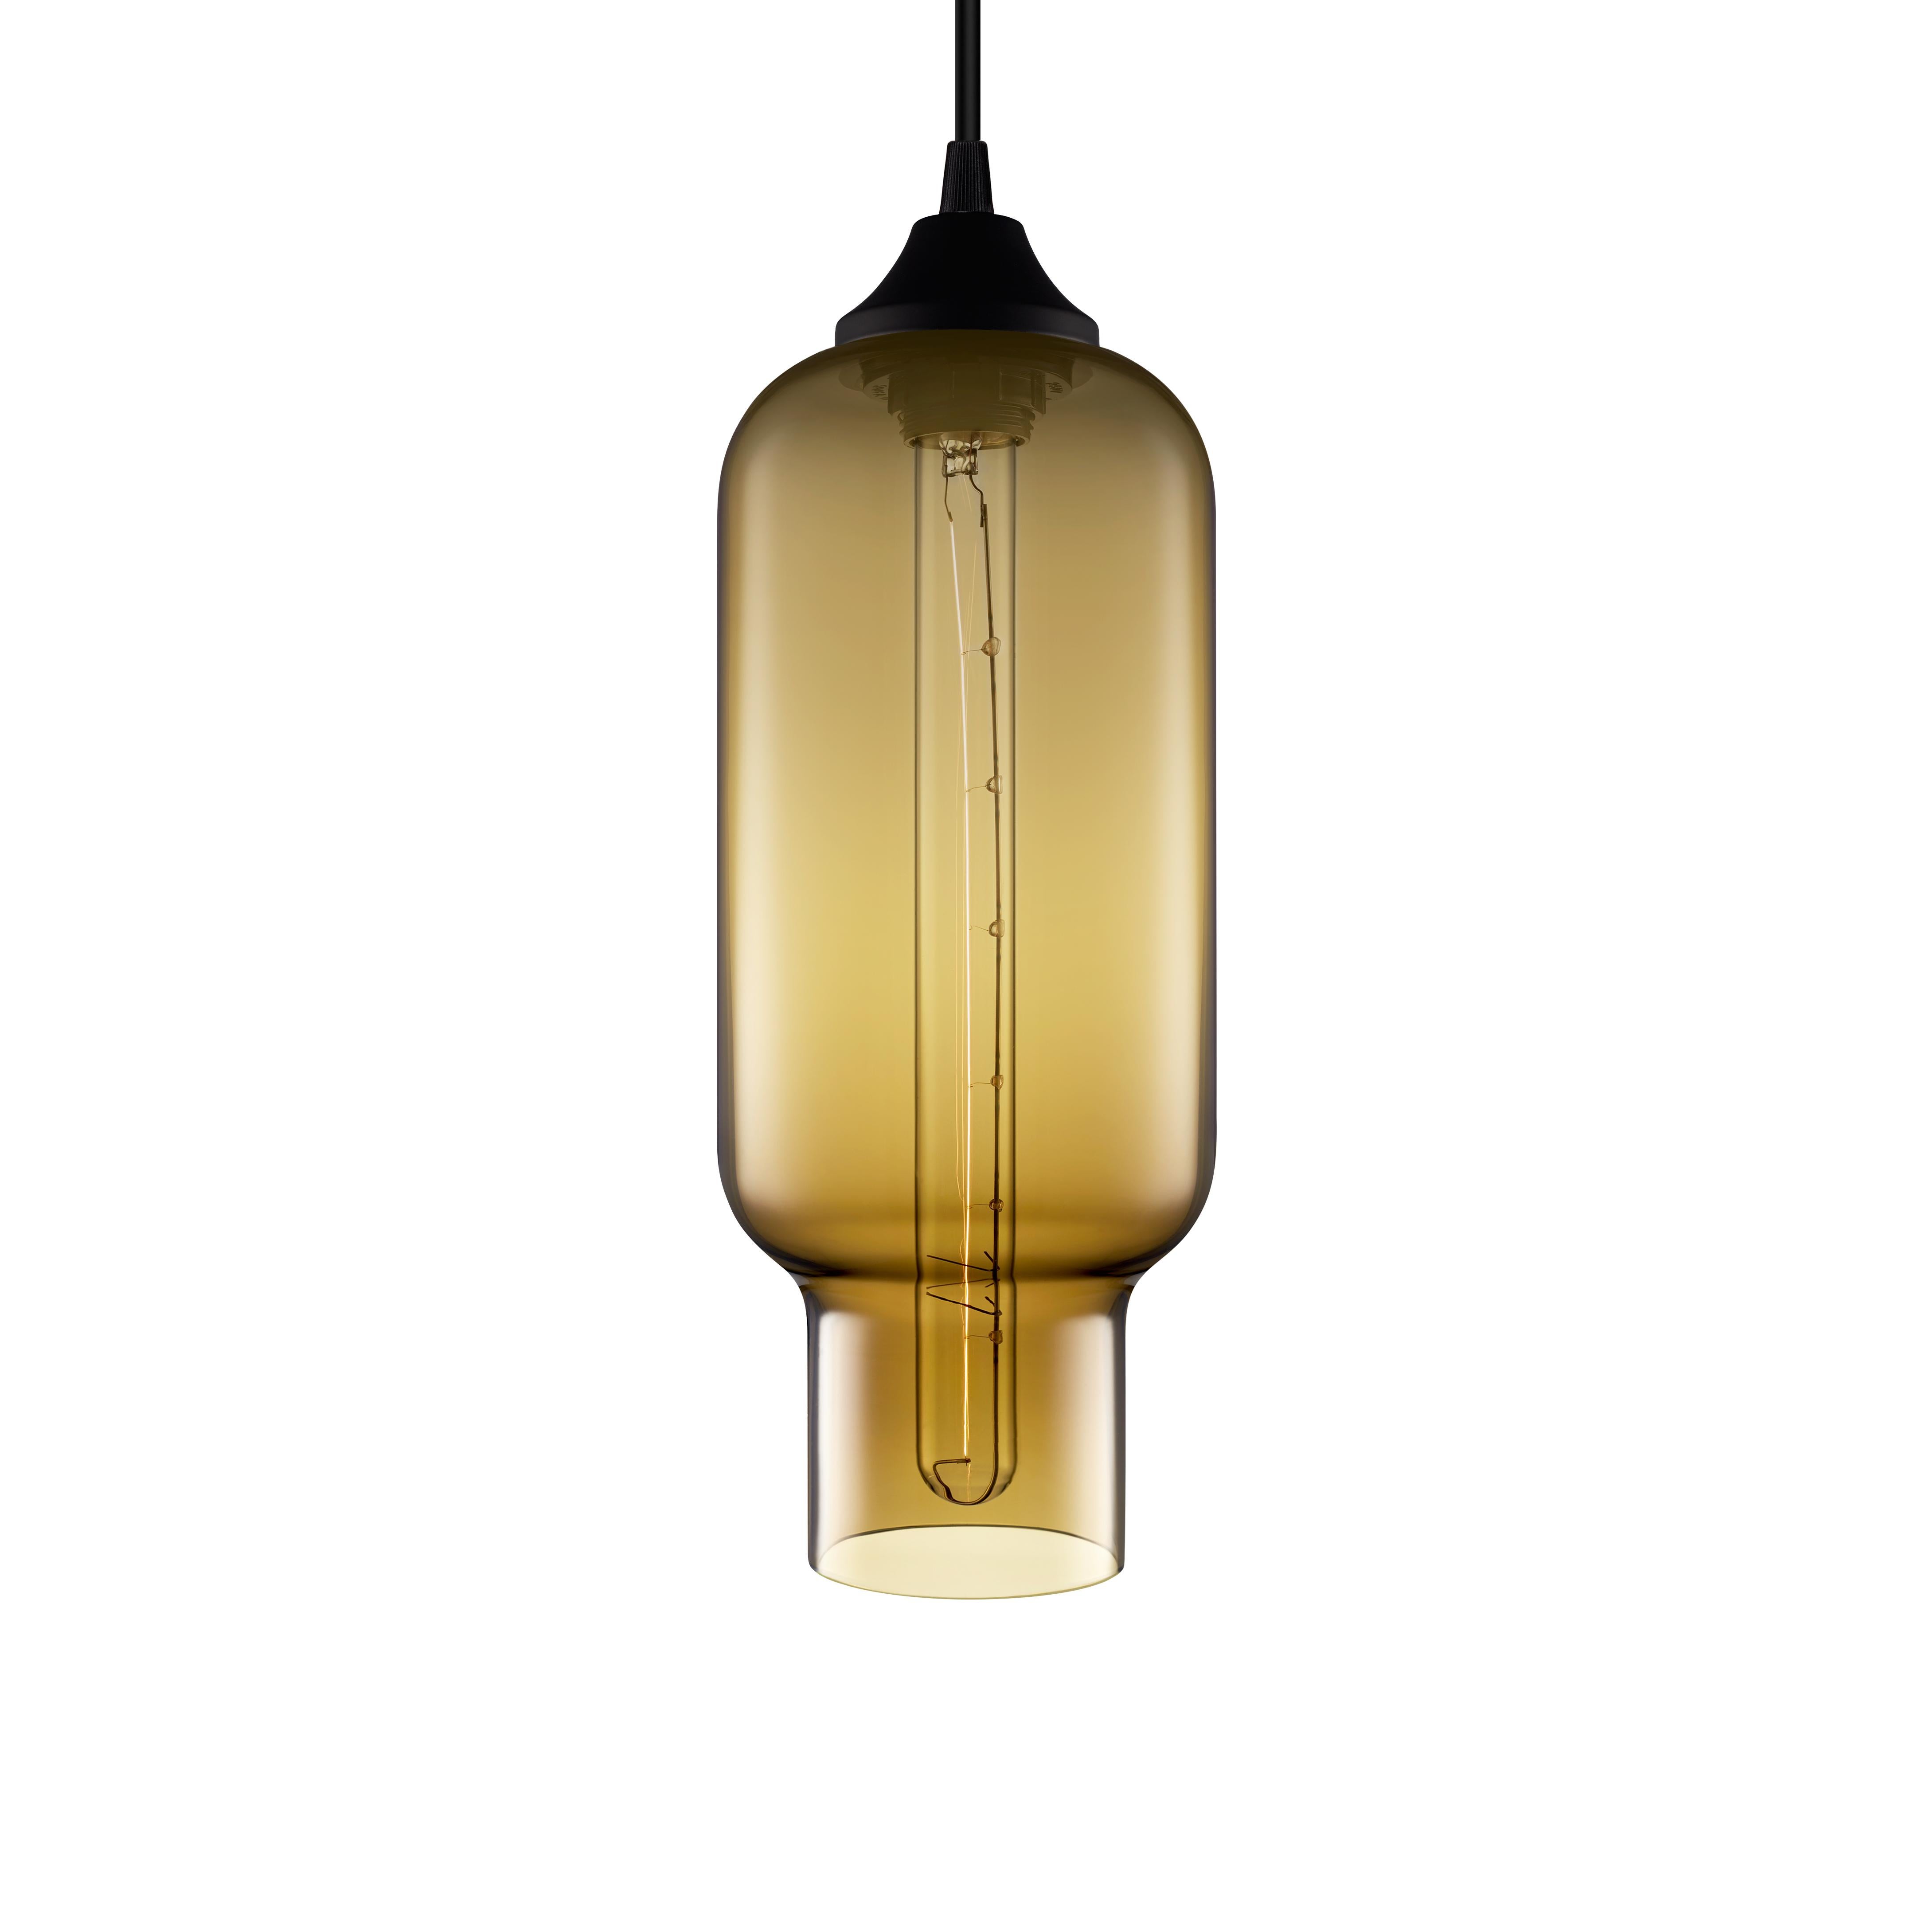 Pharos Effervescent Handblown Modern Glass Pendant Light, Made in the USA In New Condition For Sale In Beacon, NY